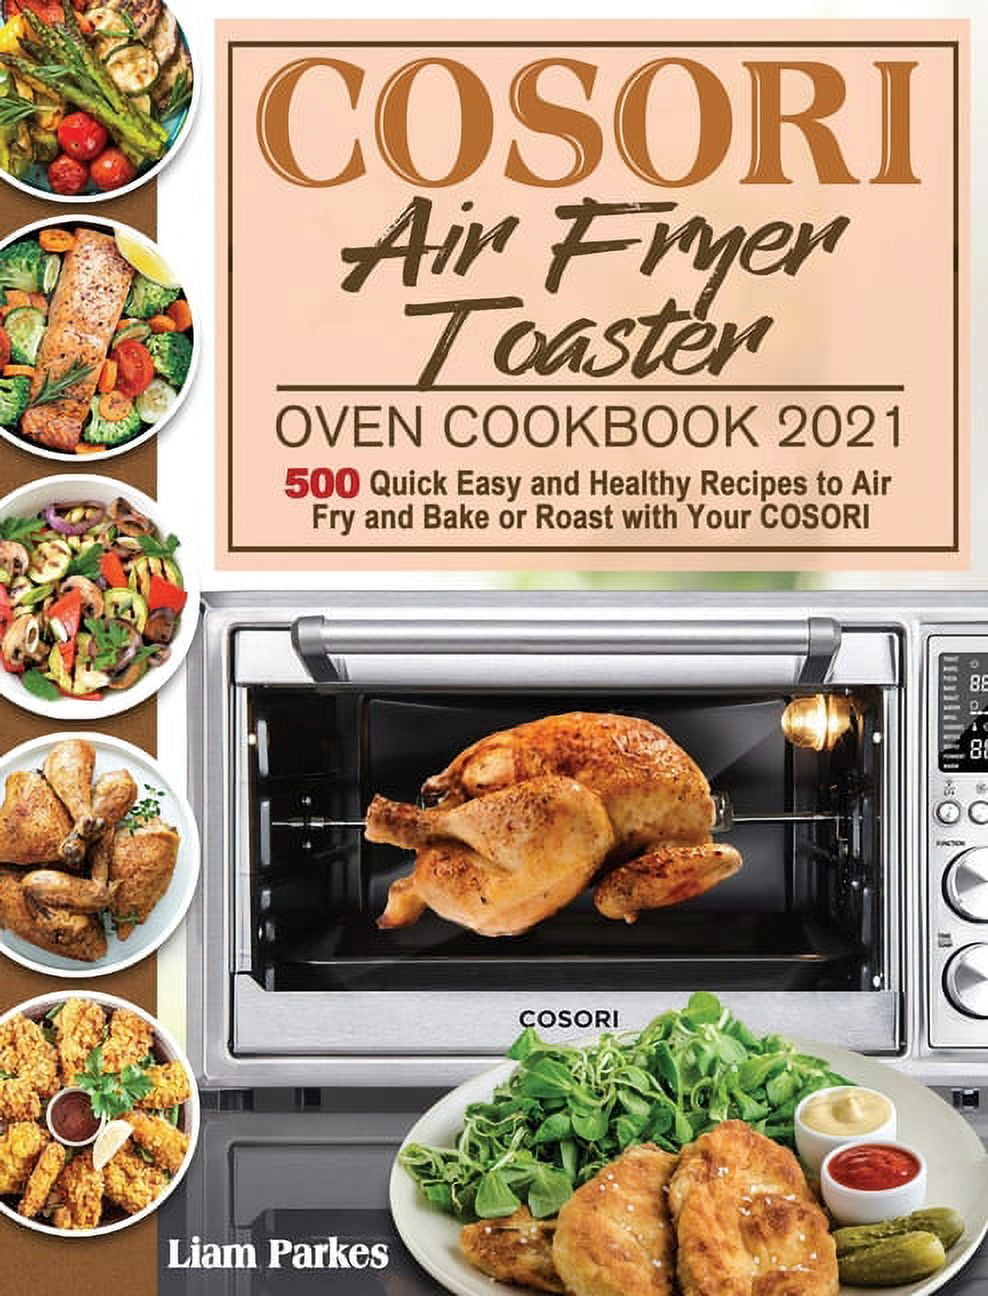 Cosori Air Fryer Toaster Oven Cookbook for Beginners: 300 Easily Crispy and  Delicious Air Fryer Toster Recipes With Your COSORI Oven (Hardcover)